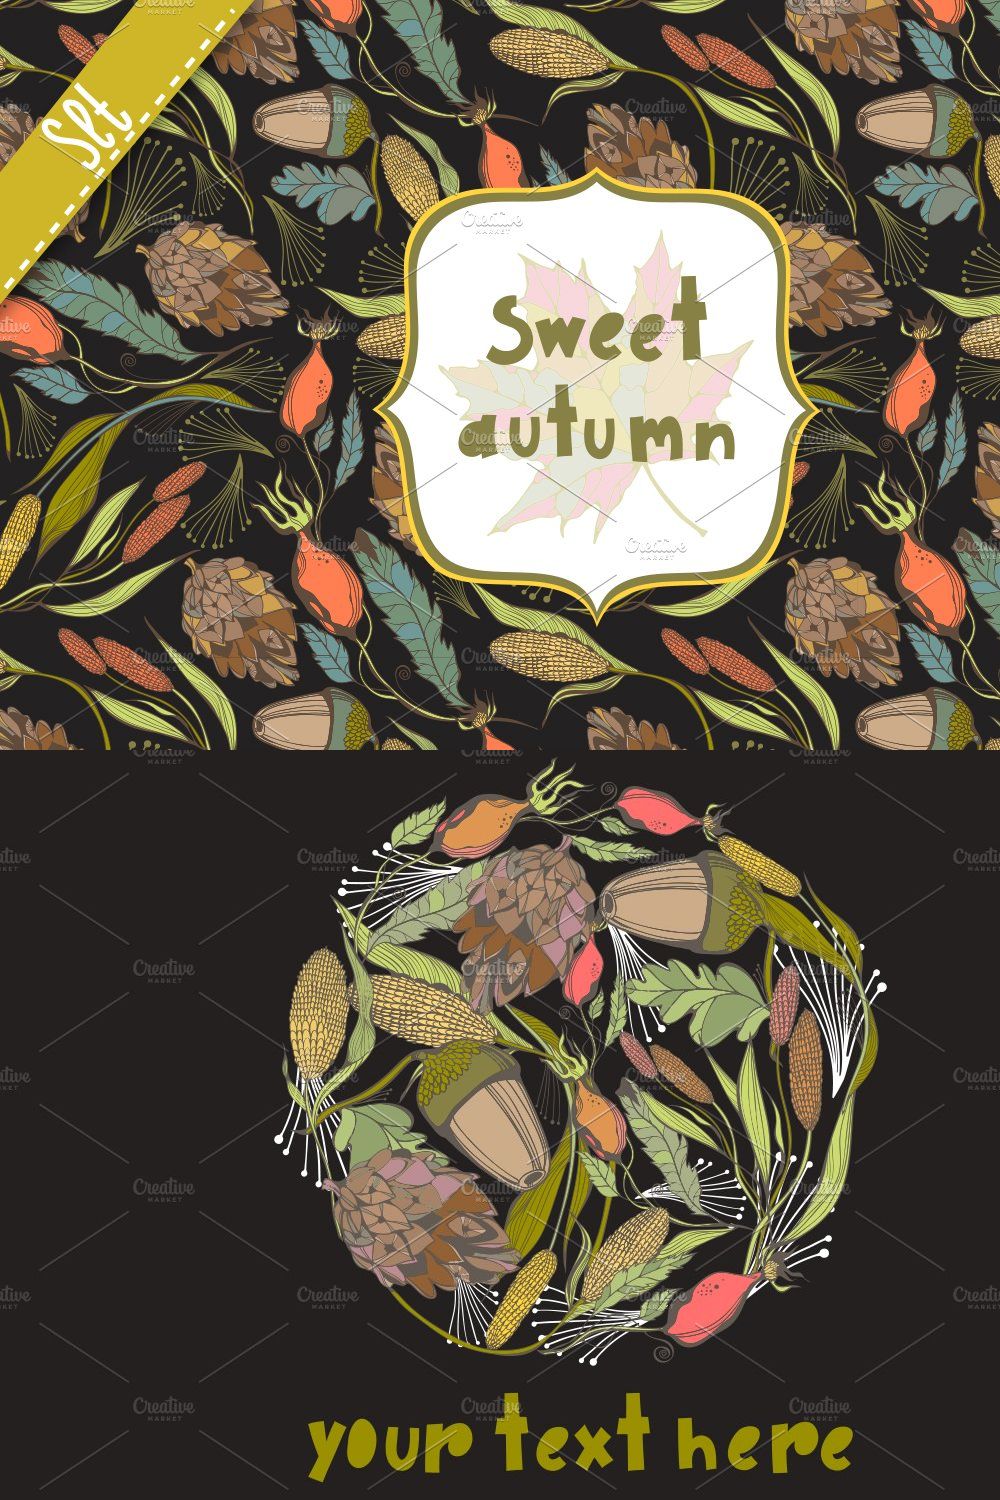 Sweet autumn pinterest preview image.